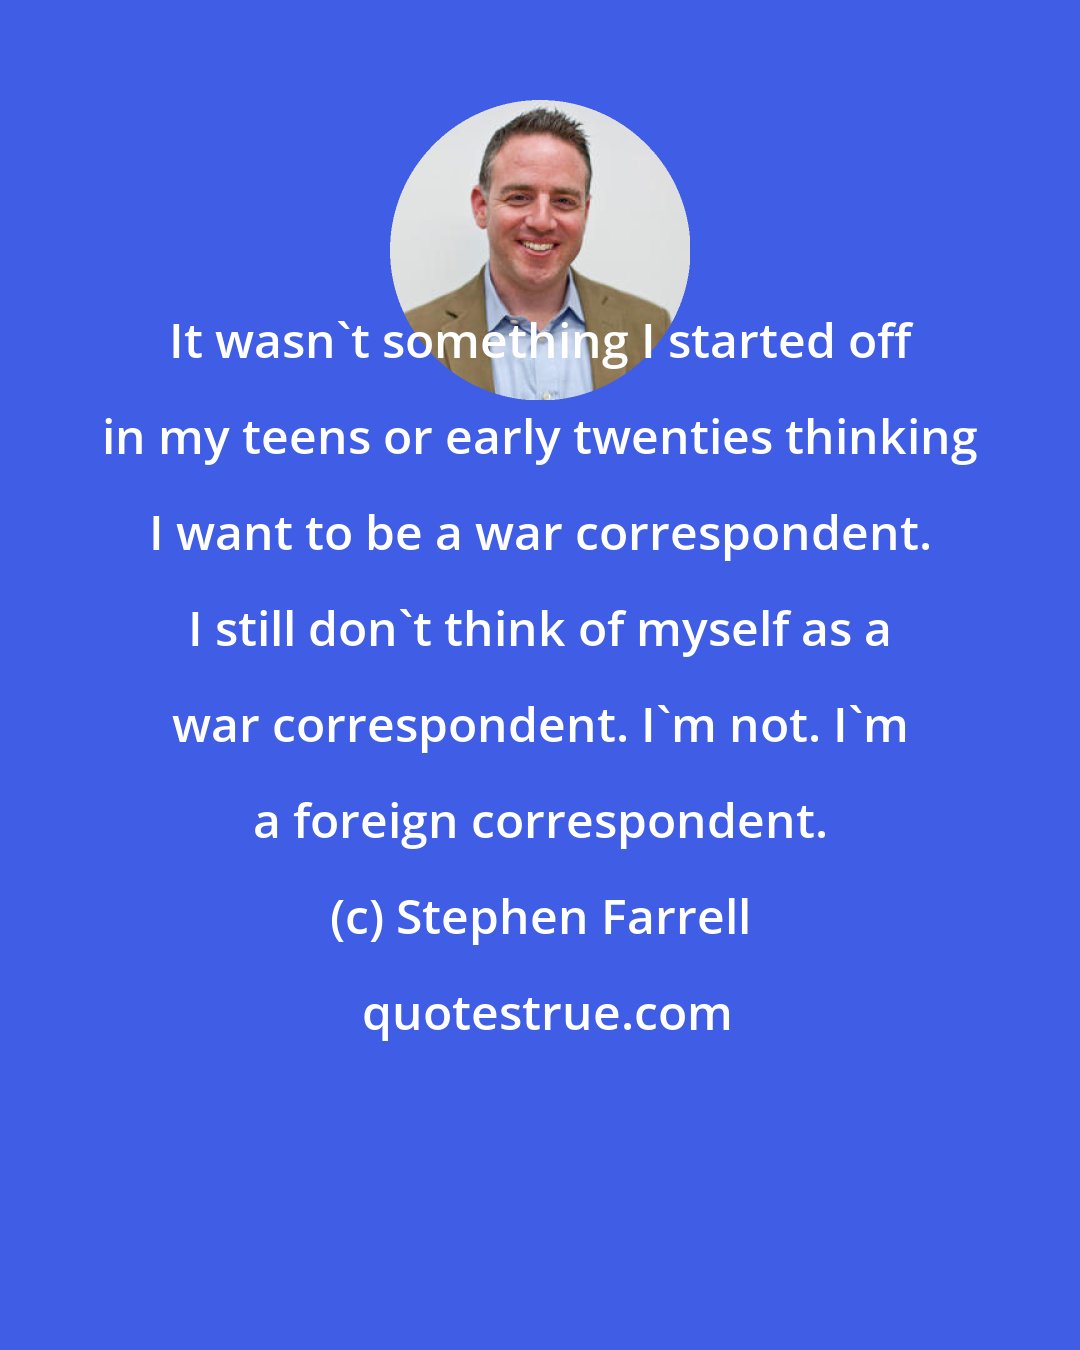 Stephen Farrell: It wasn't something I started off in my teens or early twenties thinking I want to be a war correspondent. I still don't think of myself as a war correspondent. I'm not. I'm a foreign correspondent.